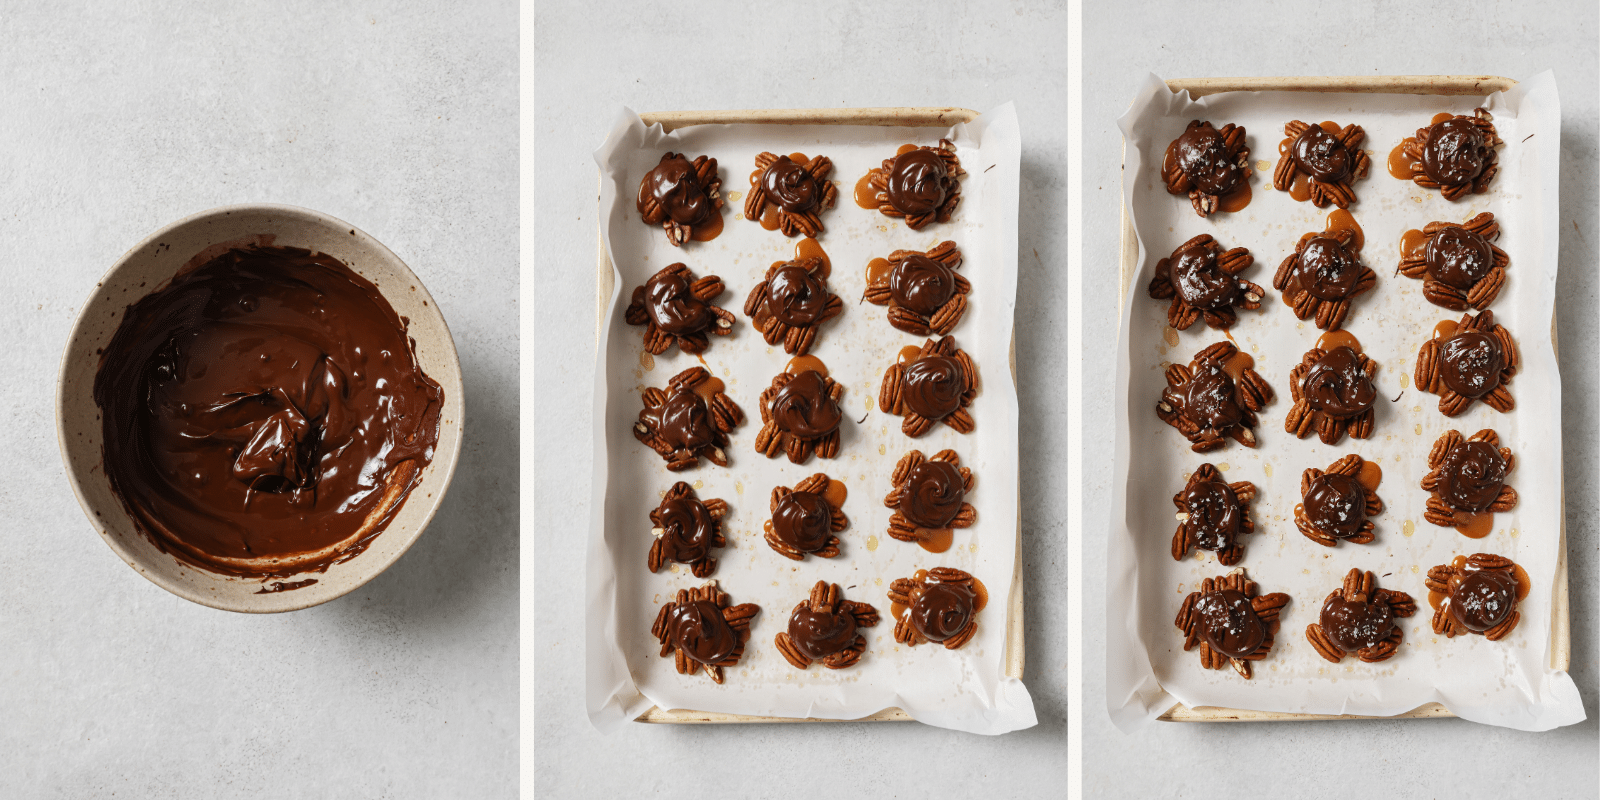 Left: melted chocolate. Center: Chocolate added to pecan and caramel clusters. Right: Coarse salt added on top.